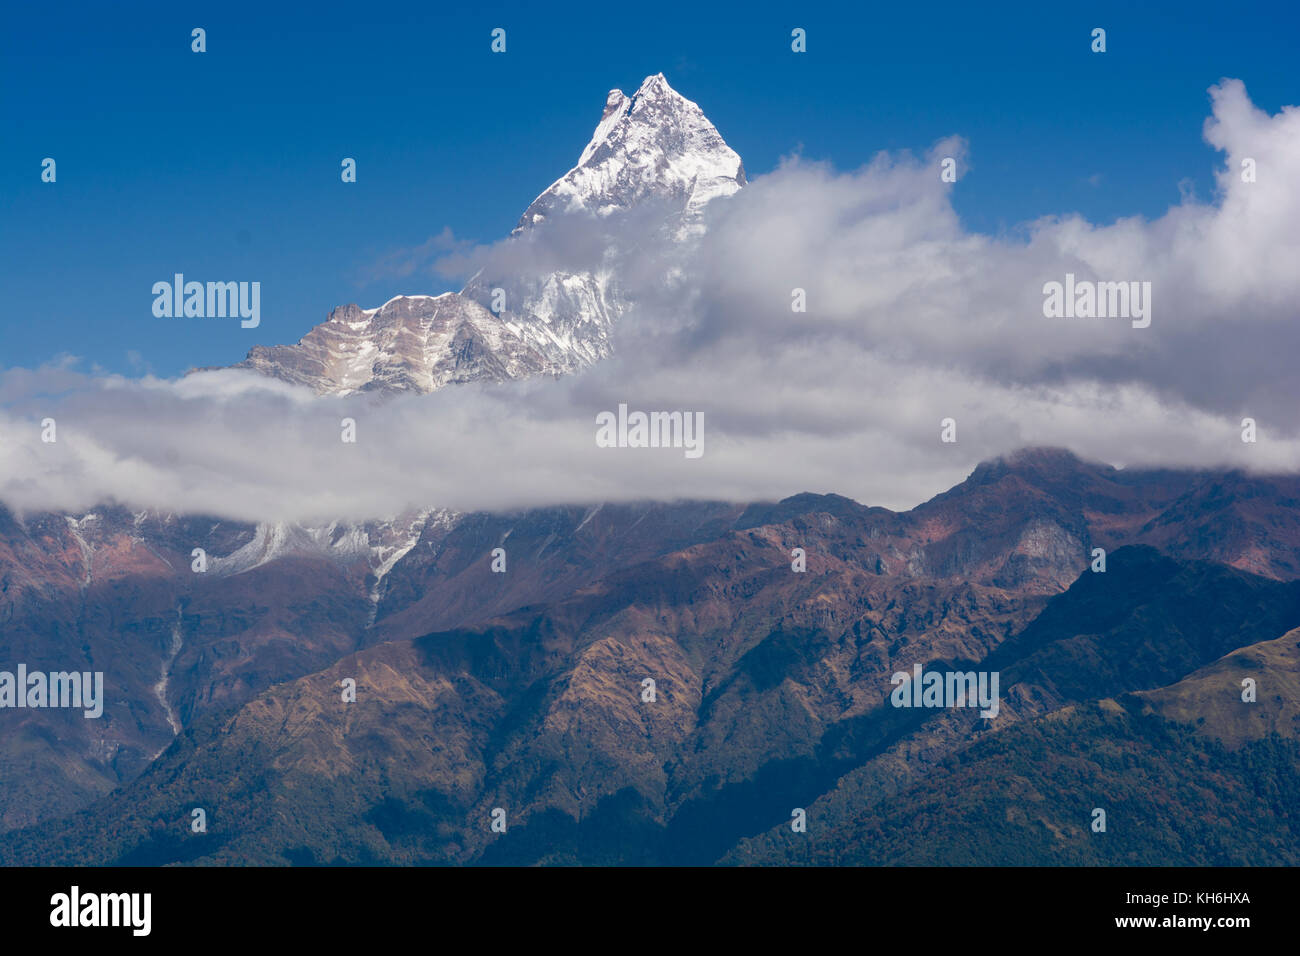 View of Fishtail or Machhapuchare Mountain from Dhampus village, Nepal Stock Photo